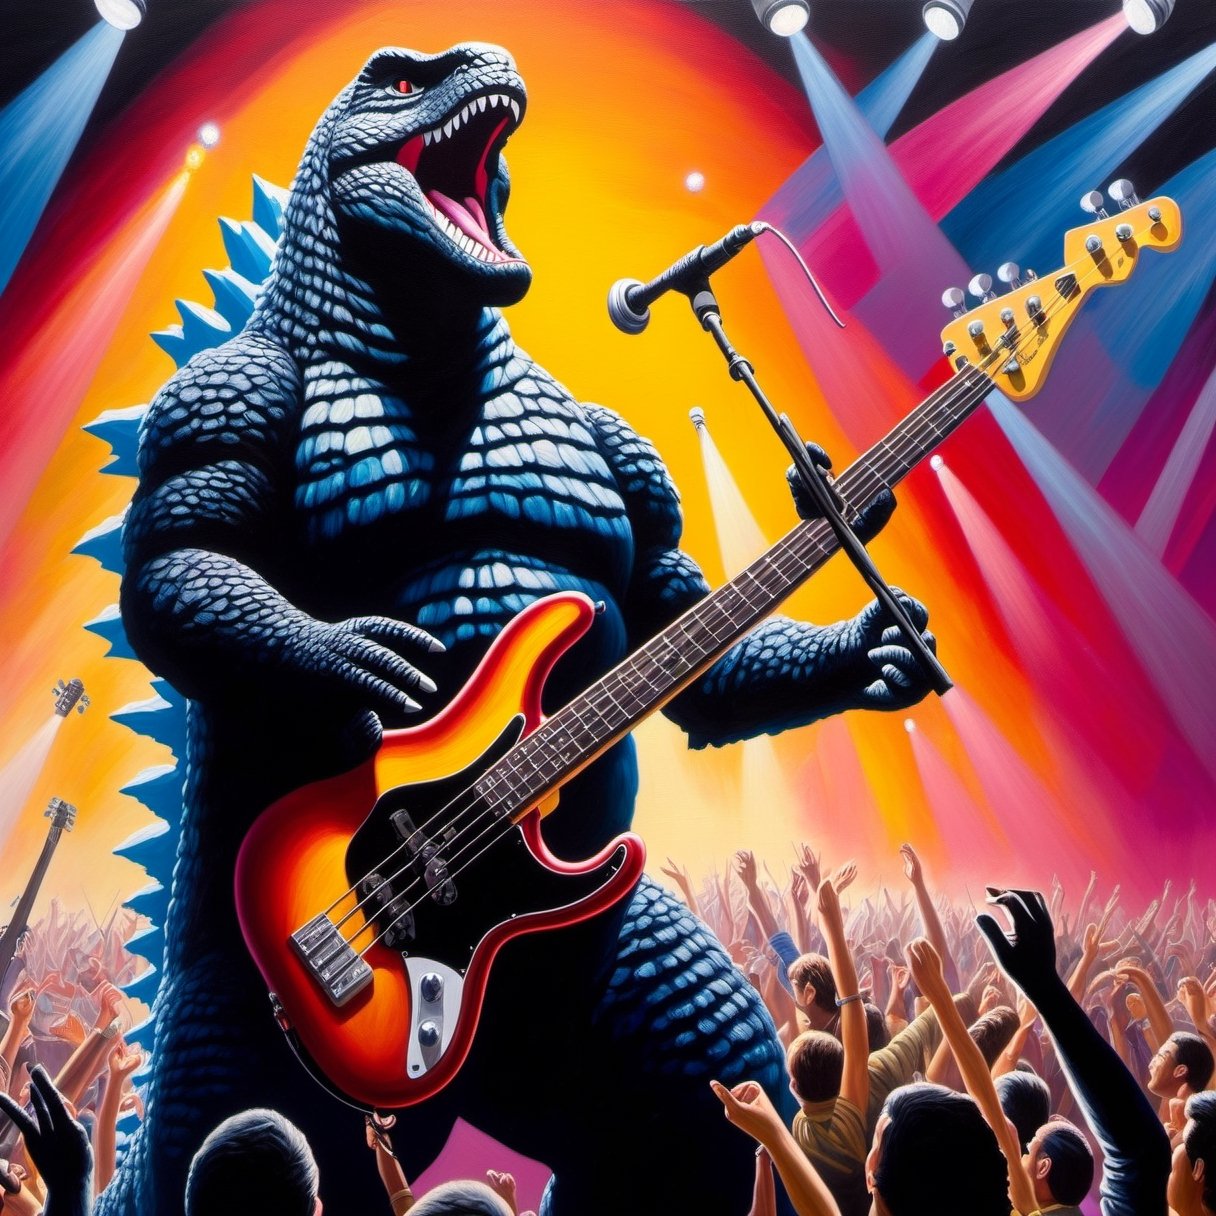 Oil painting, Close up of Godzilla playing bass, performing on stage, Spotlights and bright colorful music show lights, silhouetted crowd of people around the photographer, King Kong singing along.